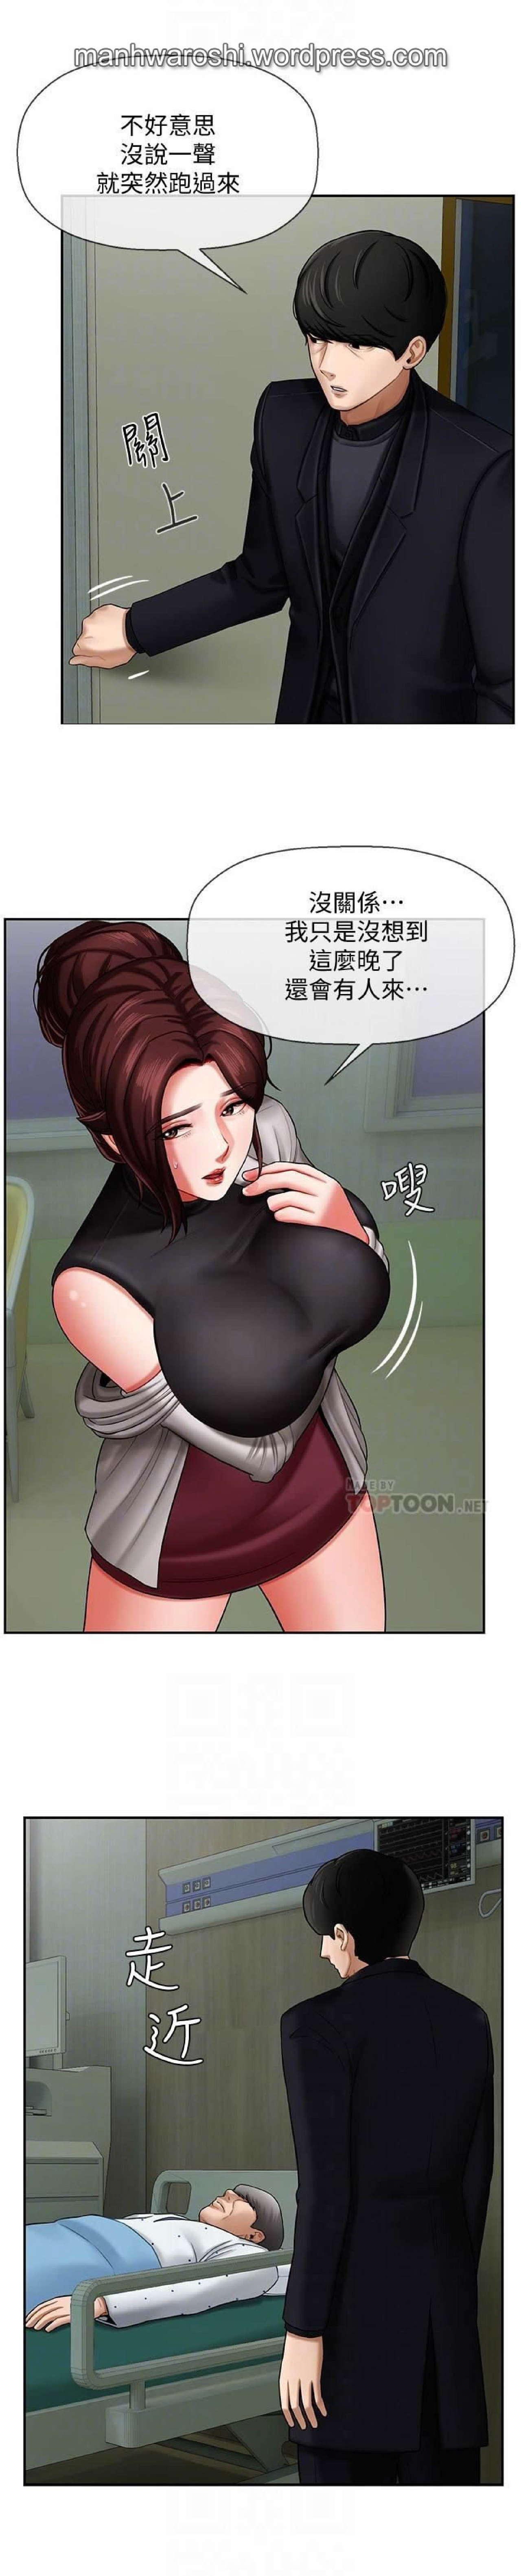 Amature Porn 坏老师 | PHYSICAL CLASSROOM 3 Gozo - Page 6